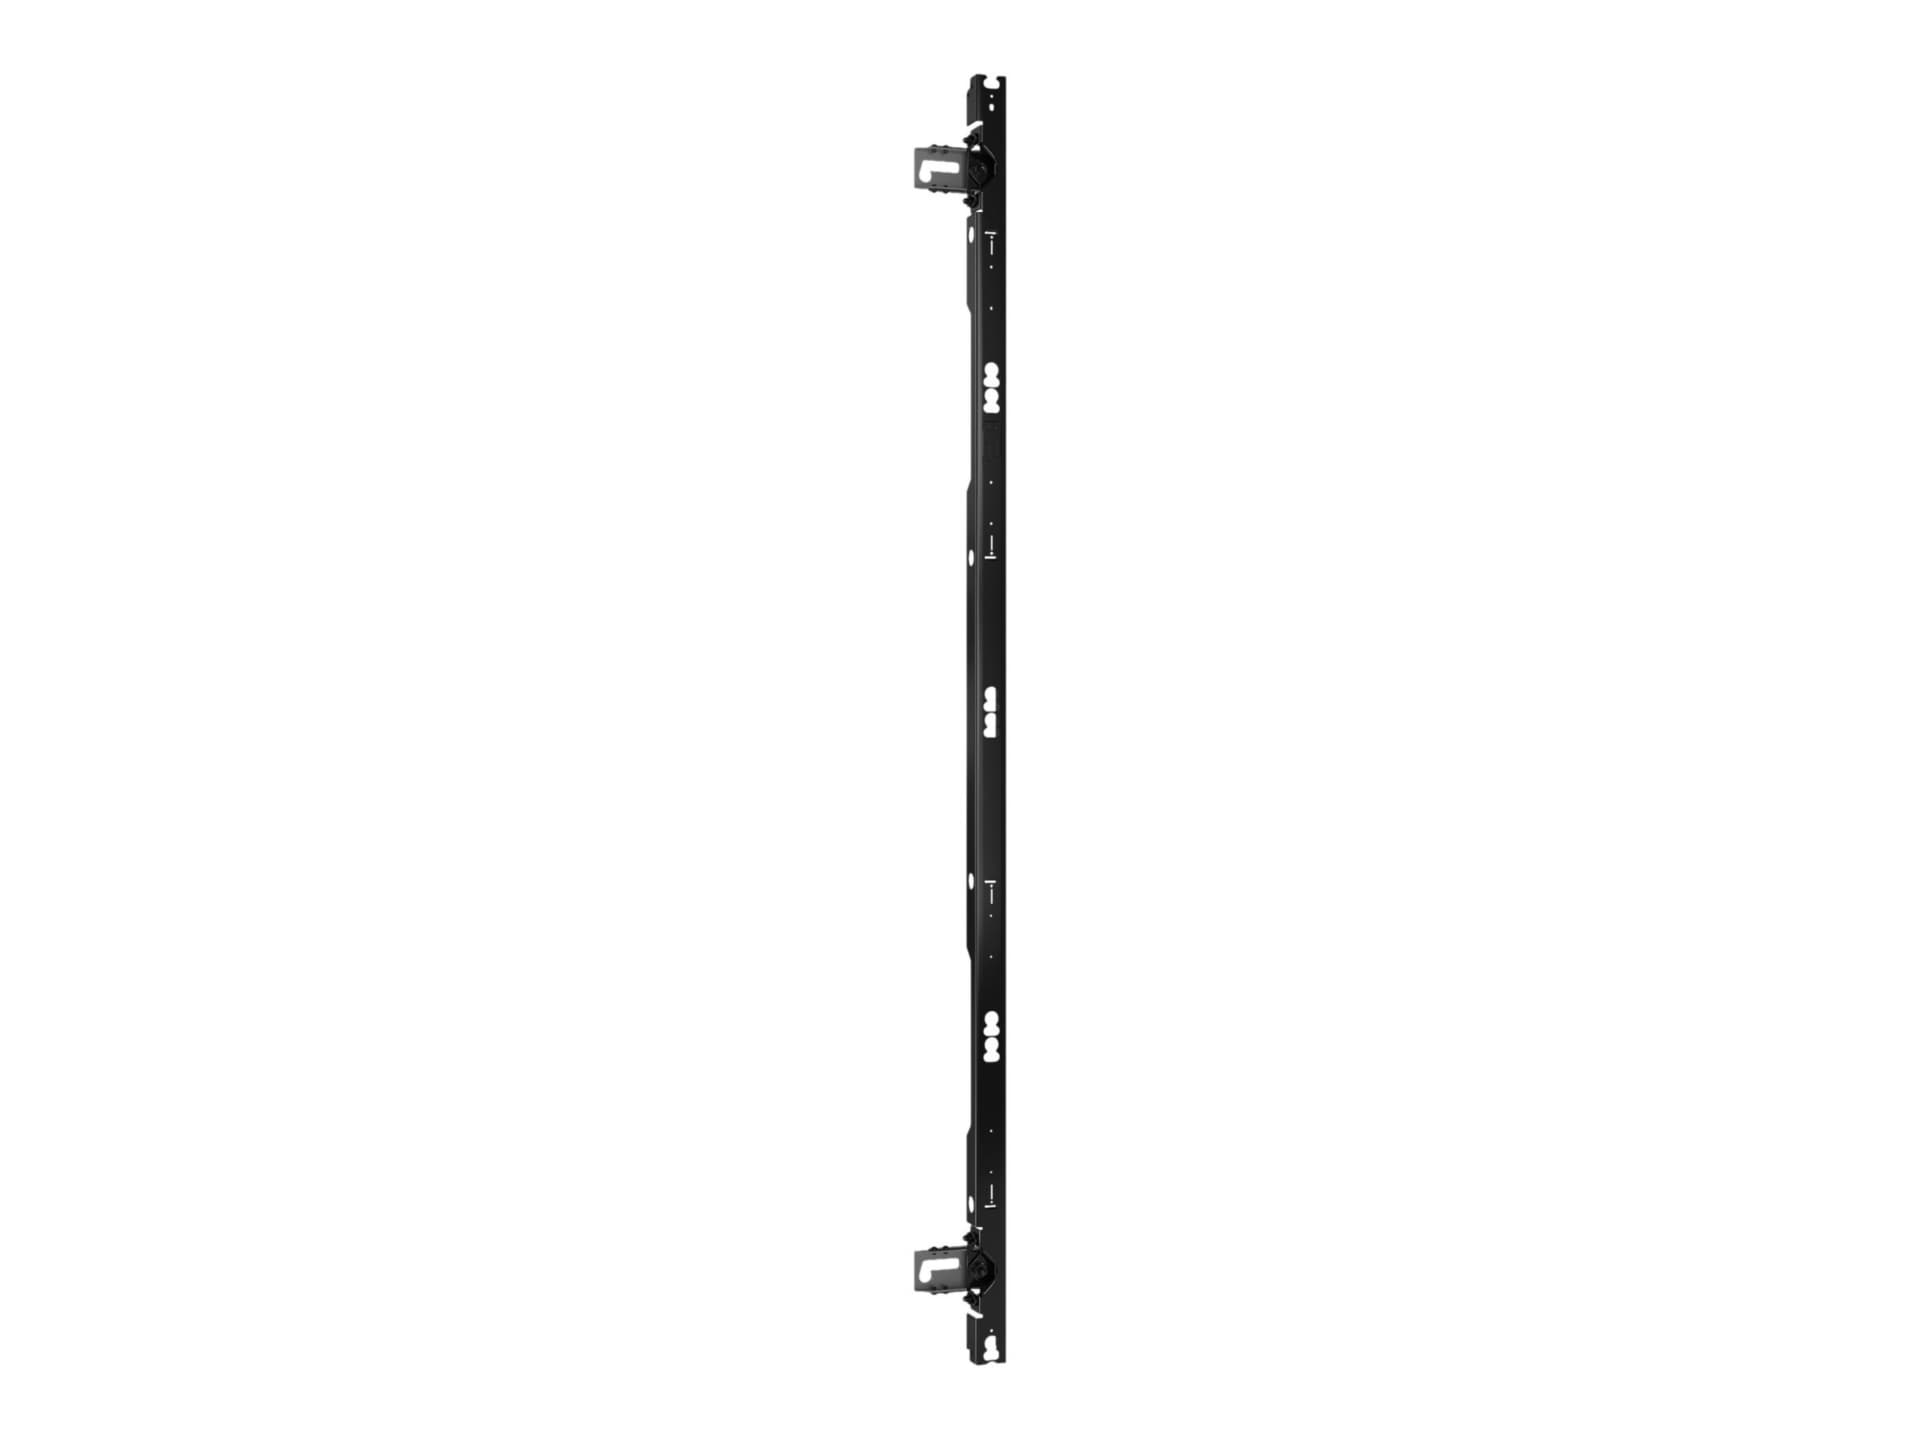 Chief TiLED Right dvLED Wall Mount - For 4 Tall LG LSCB Series Ultra Slim Displays - Black